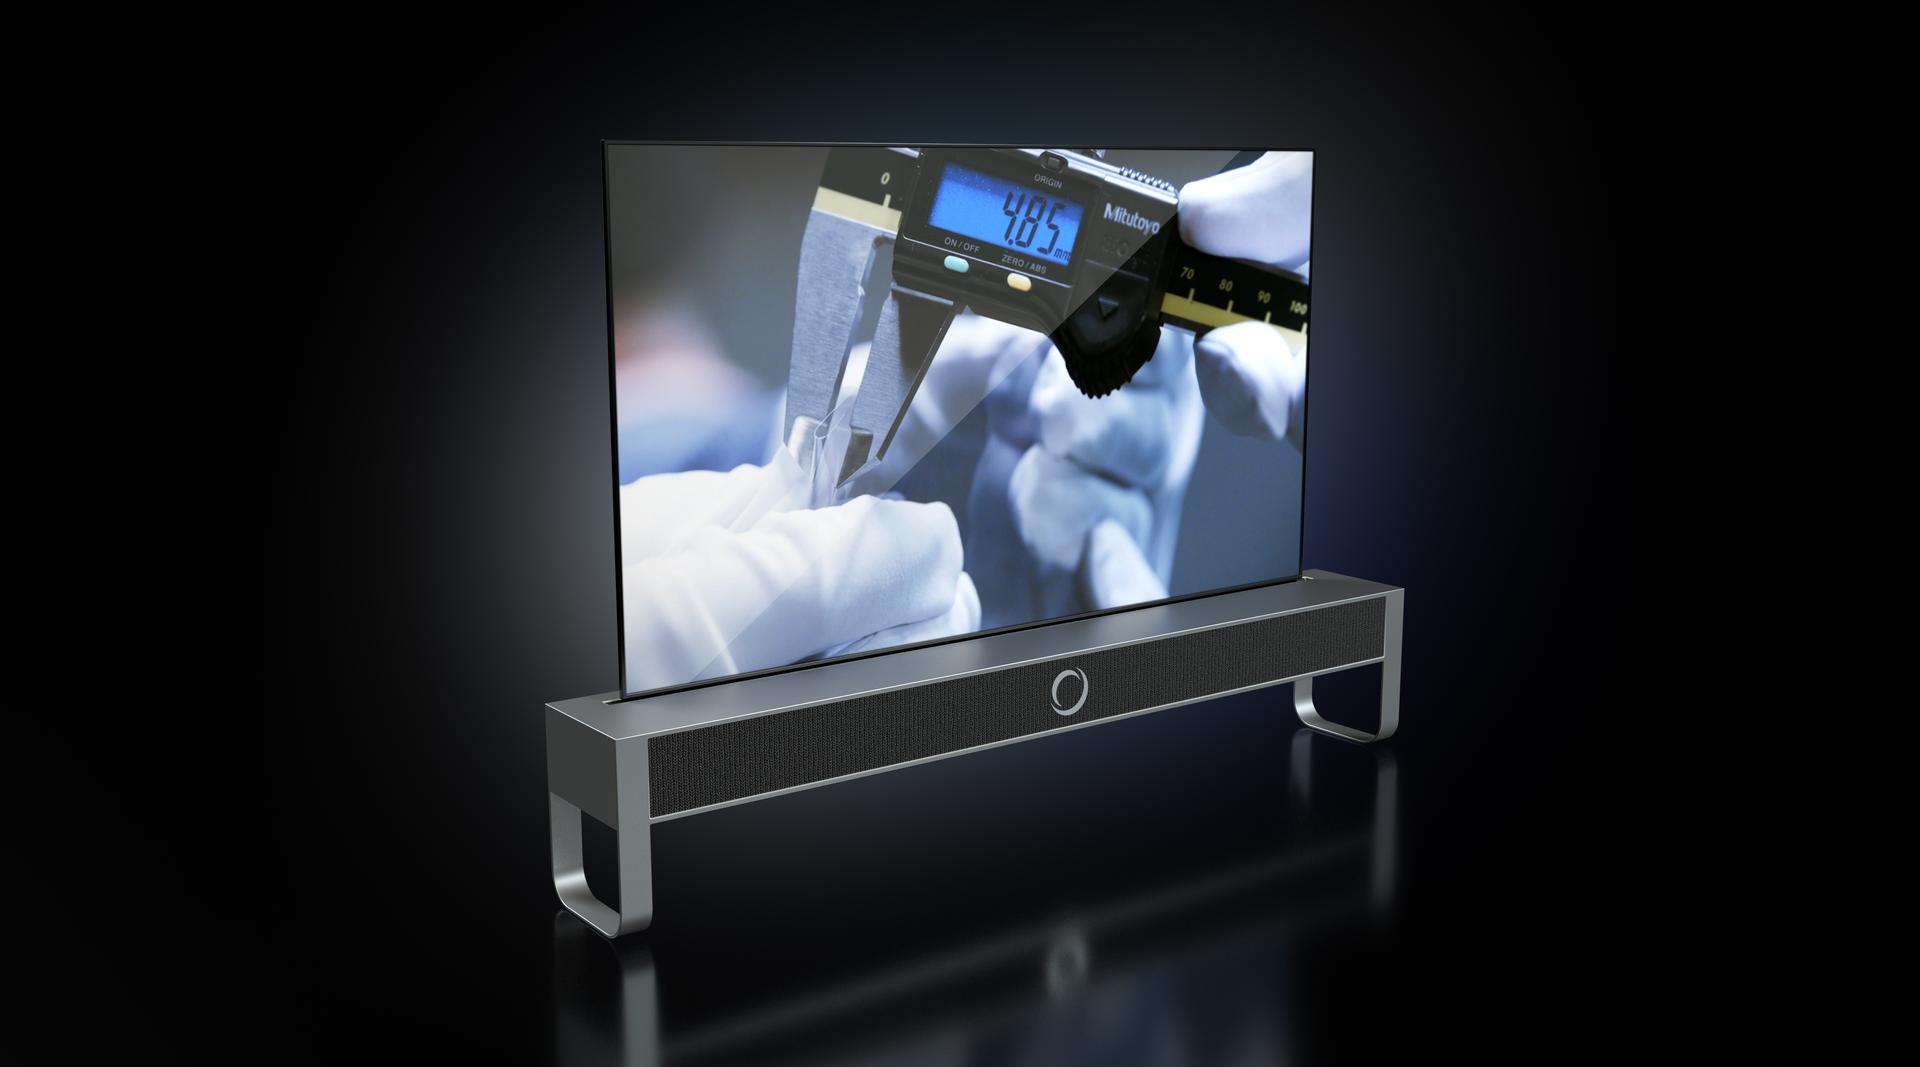 Flexible digital display rolled up into a stand